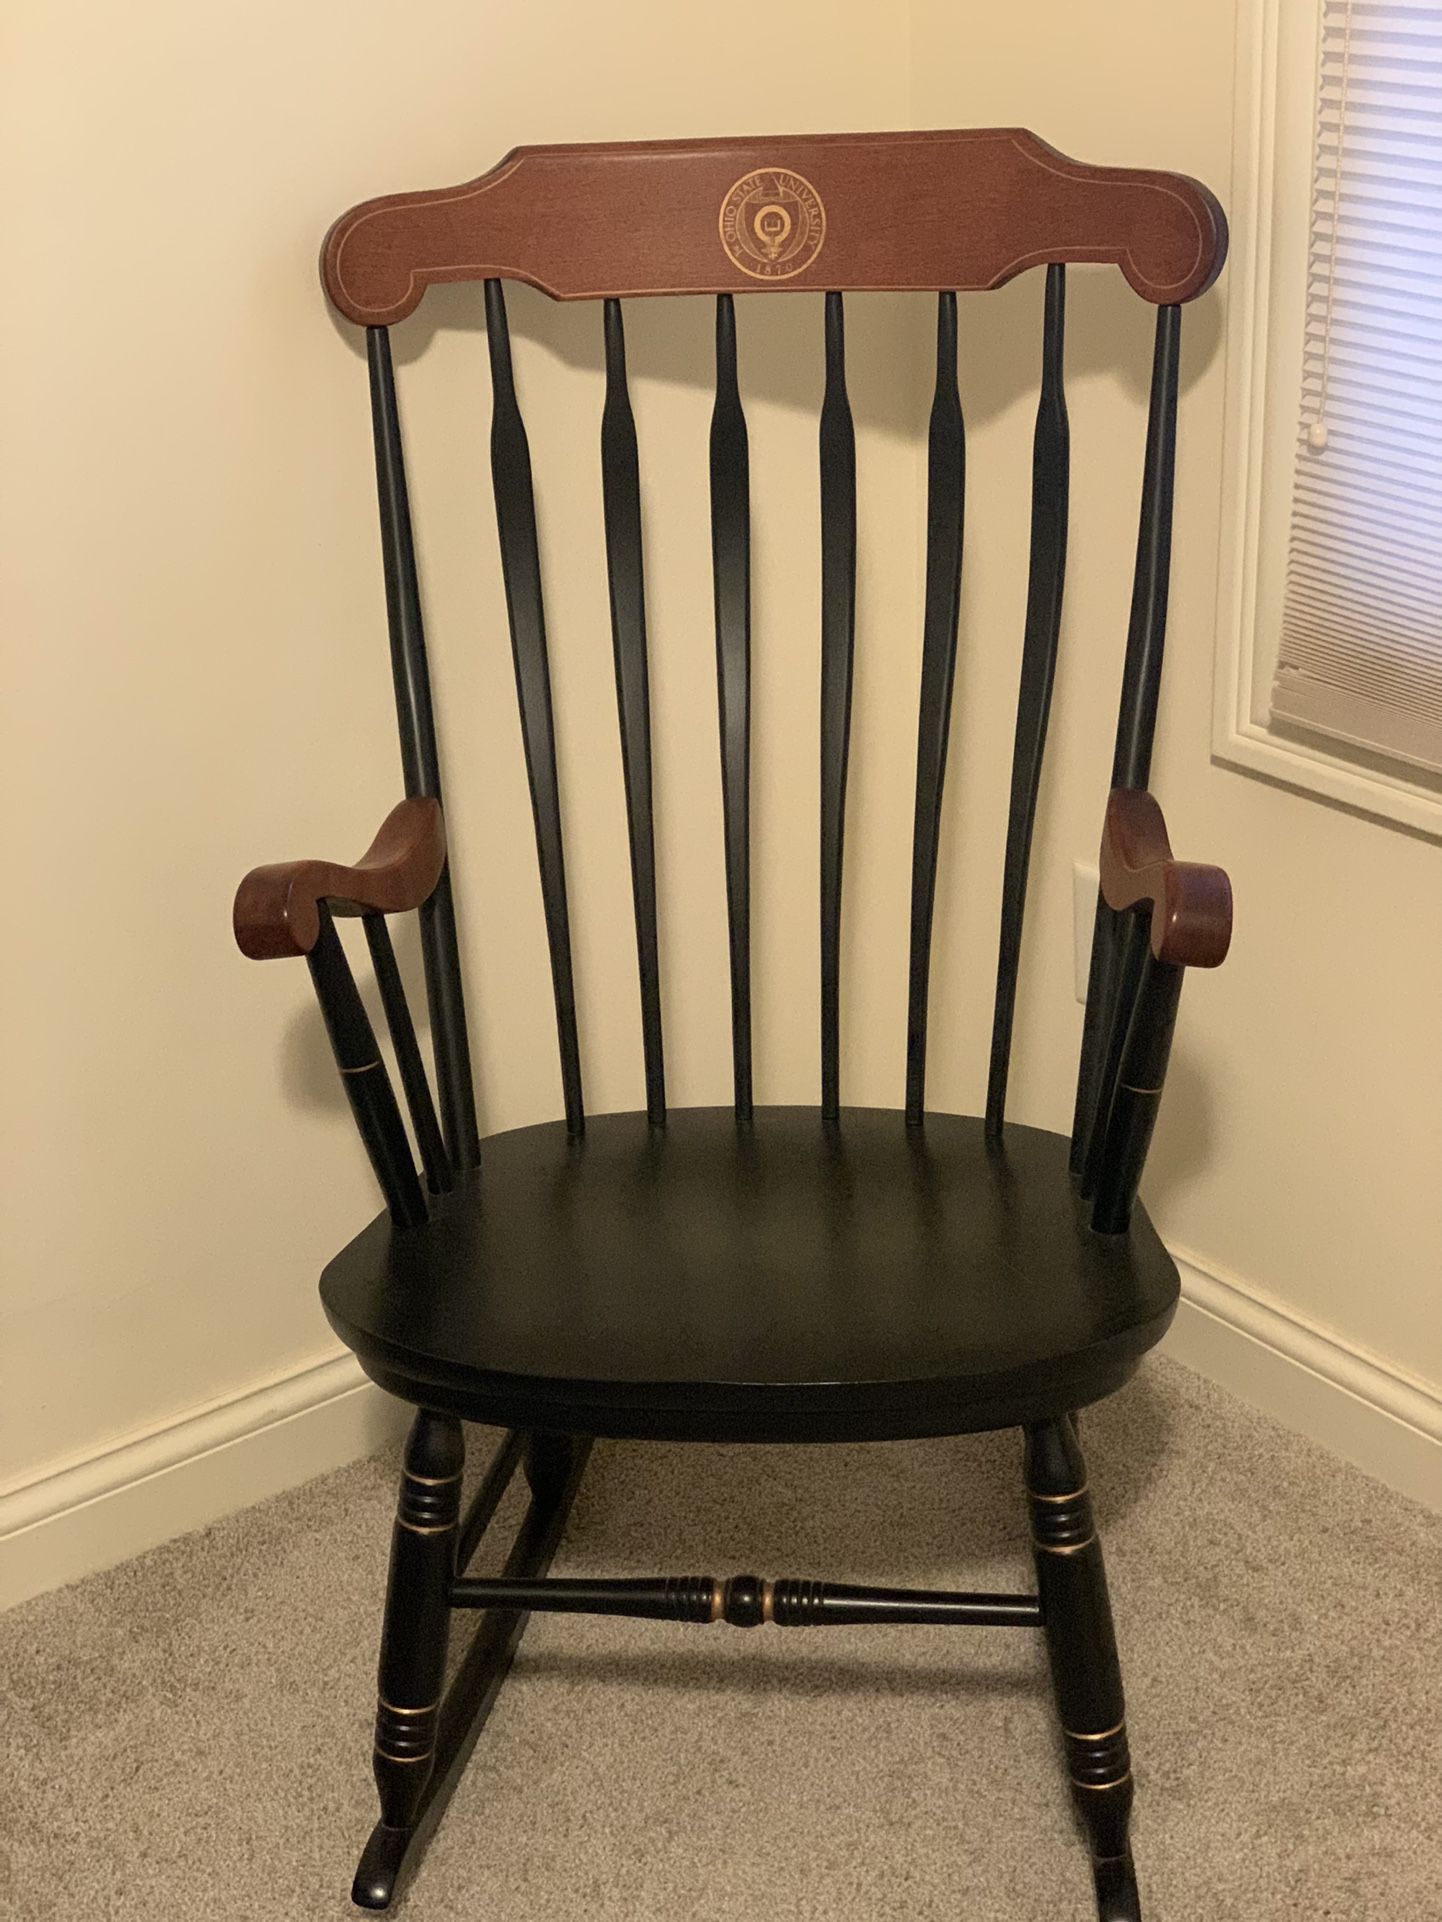 OSU Wooden Rocking Chair. Available immediately. Will take Reasonable offers.